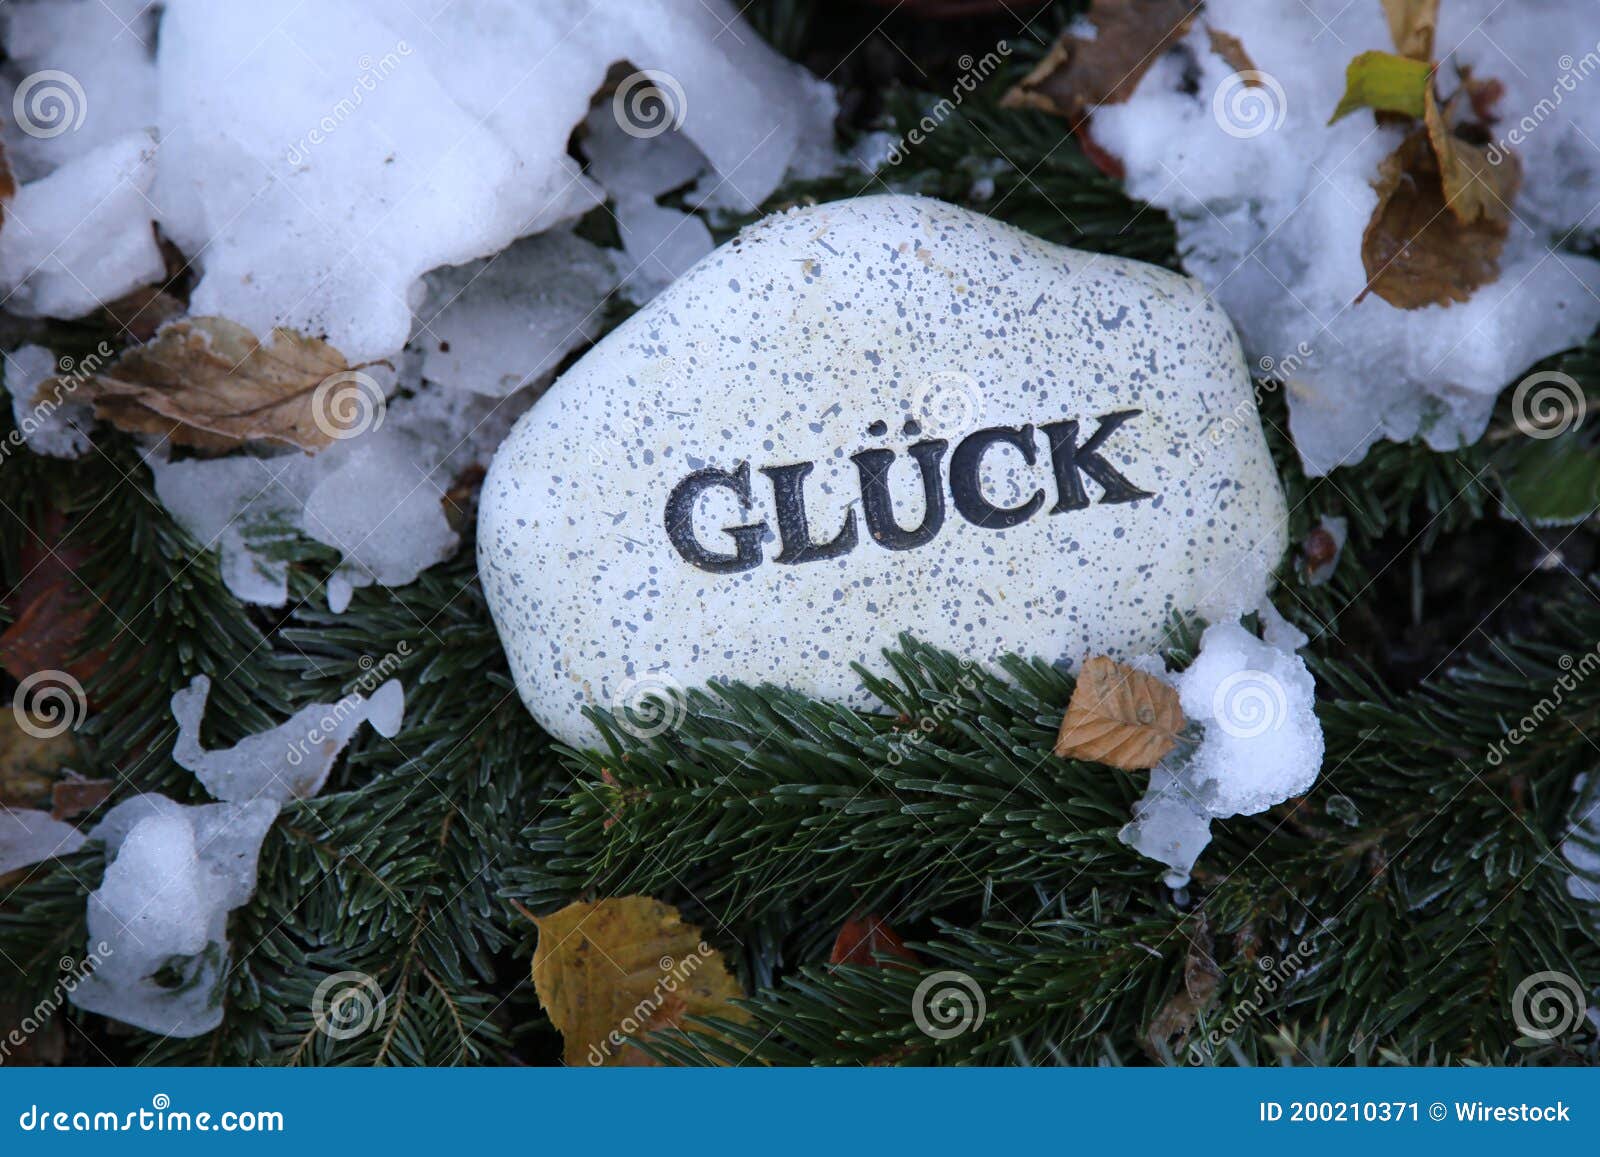 stone on snowy tree branches with an inscription in german gluck meaning luck